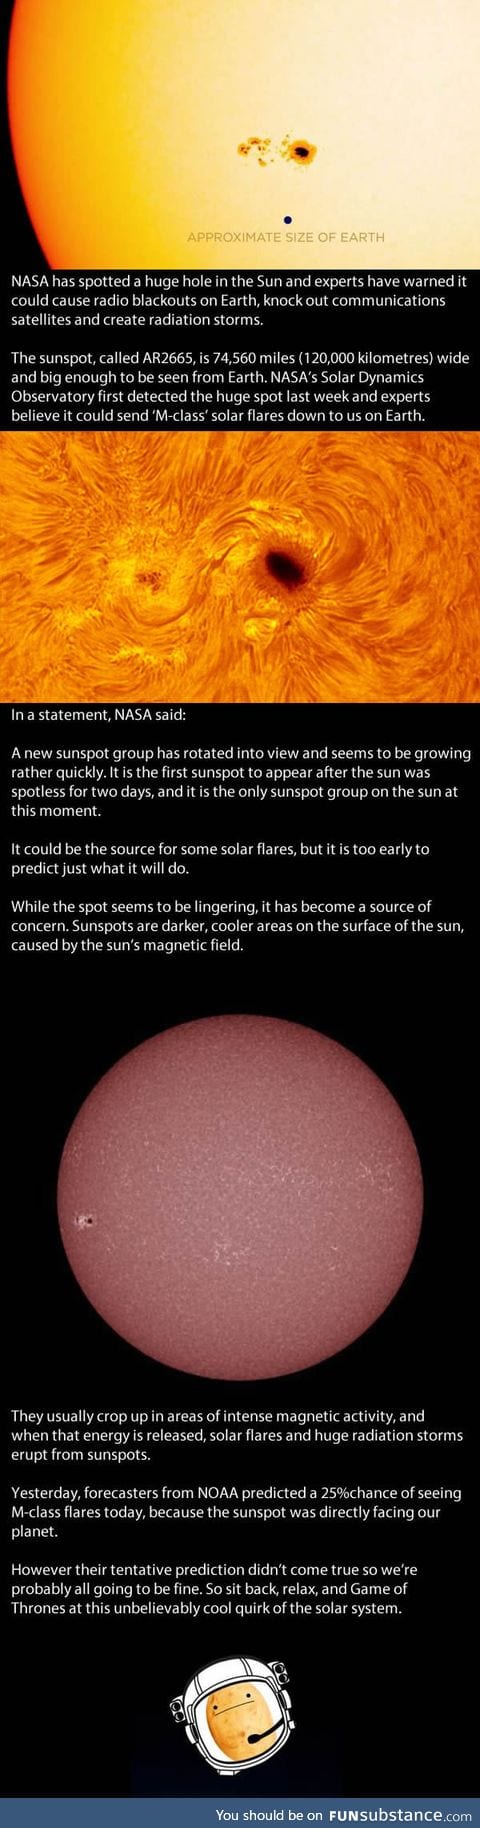 NASA Concerned by 75,000 mile wide hole appearing on the sun